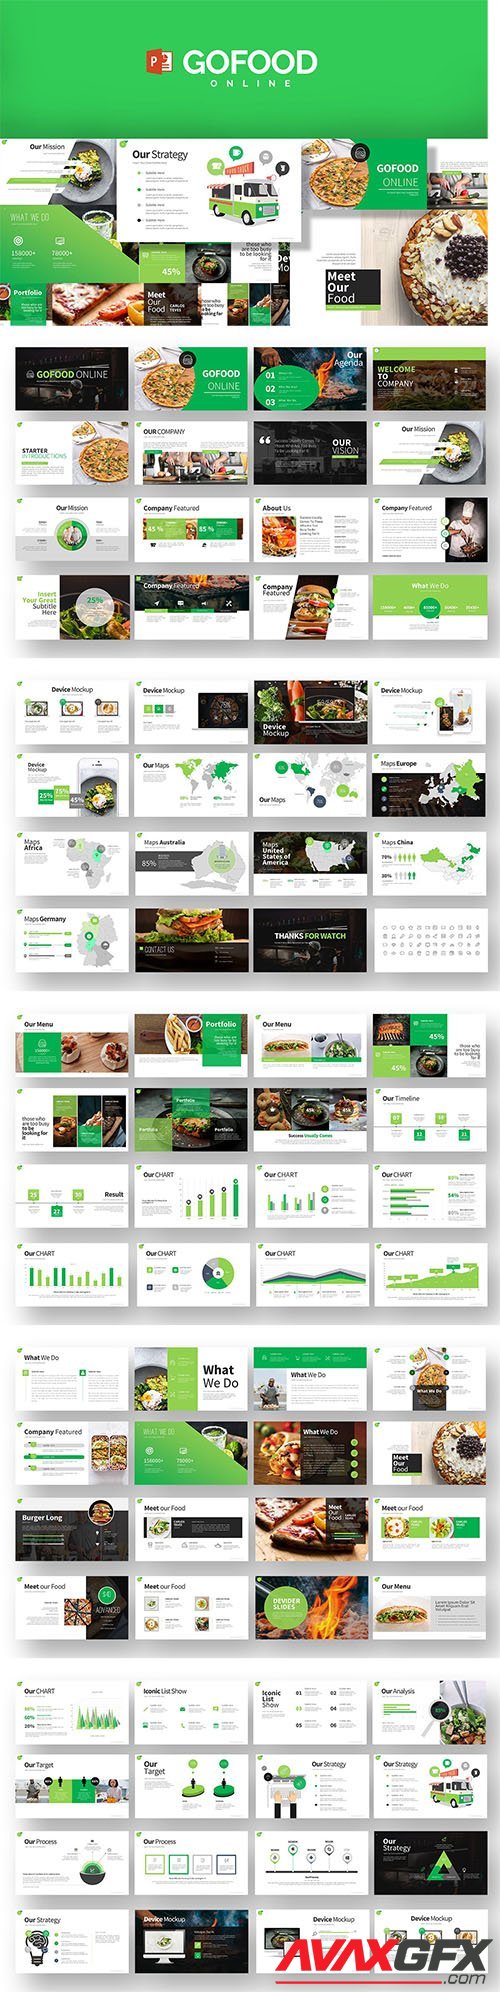 Gofood Powerpoint and Keynote Templates